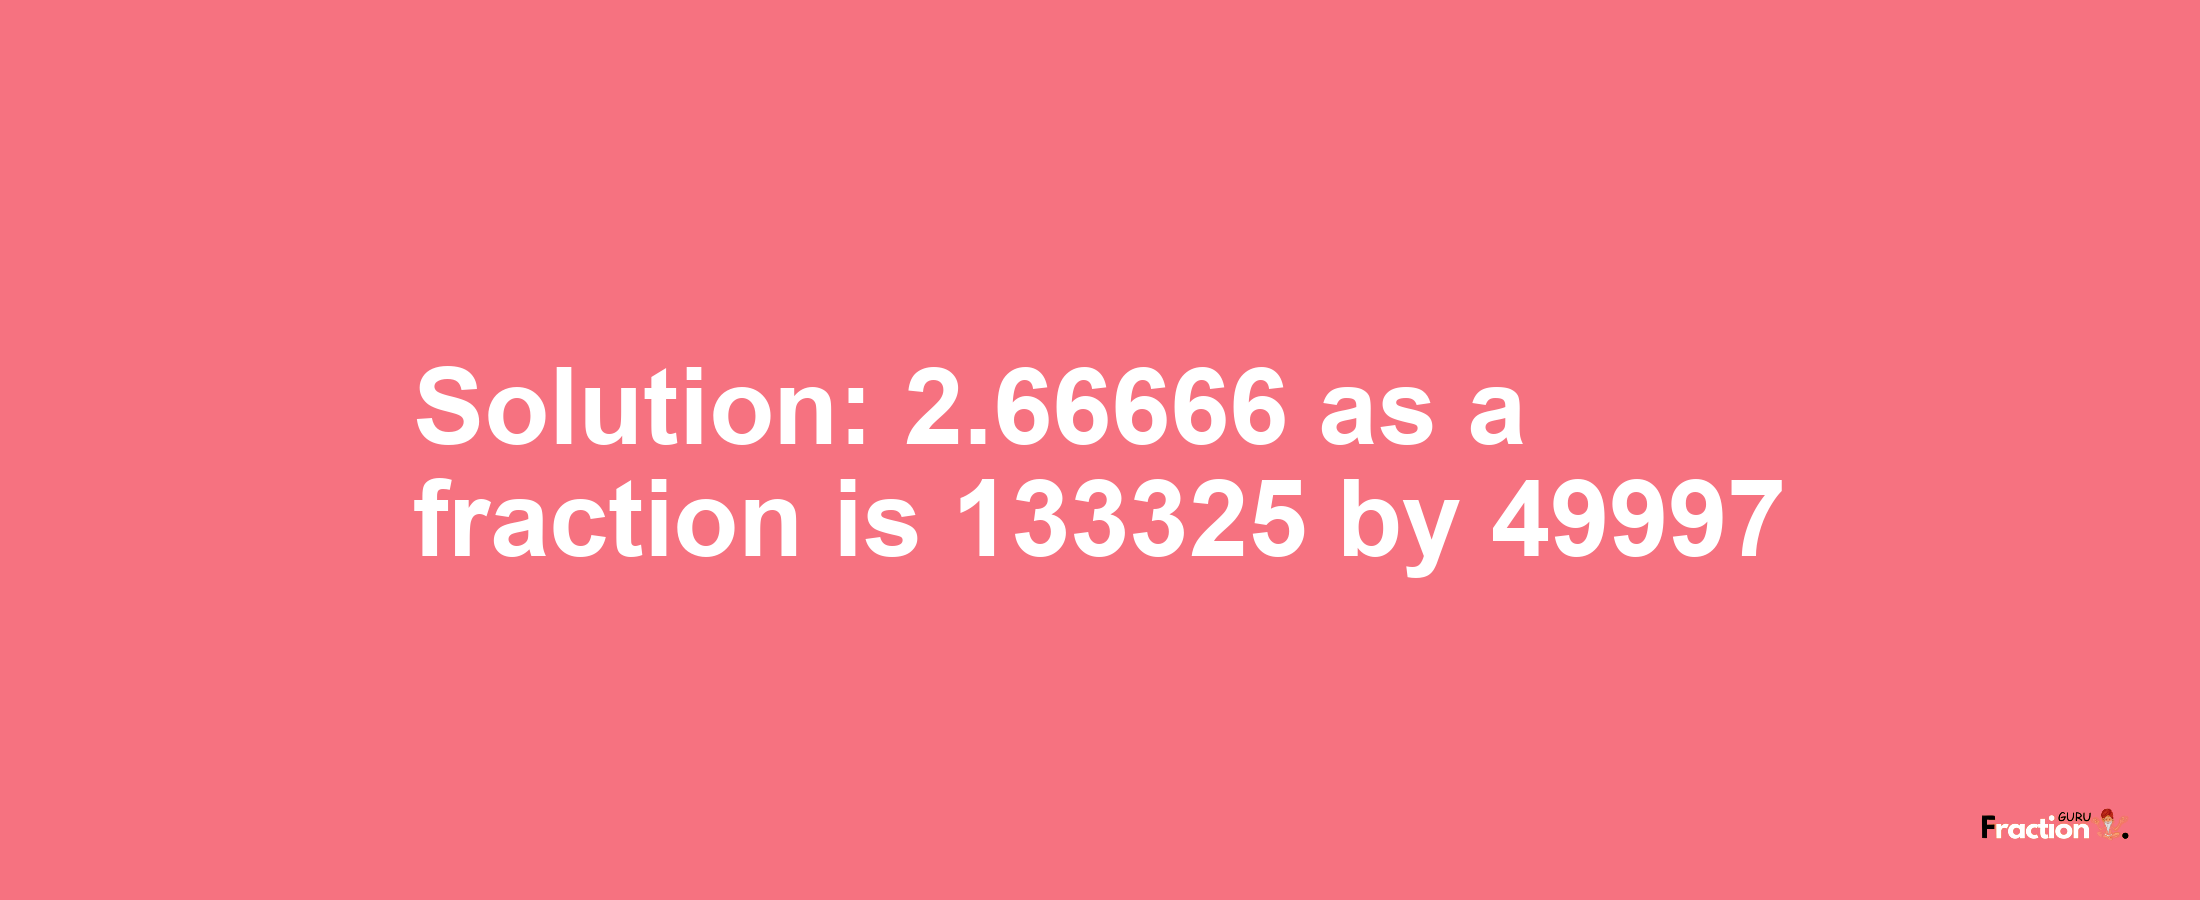 Solution:2.66666 as a fraction is 133325/49997